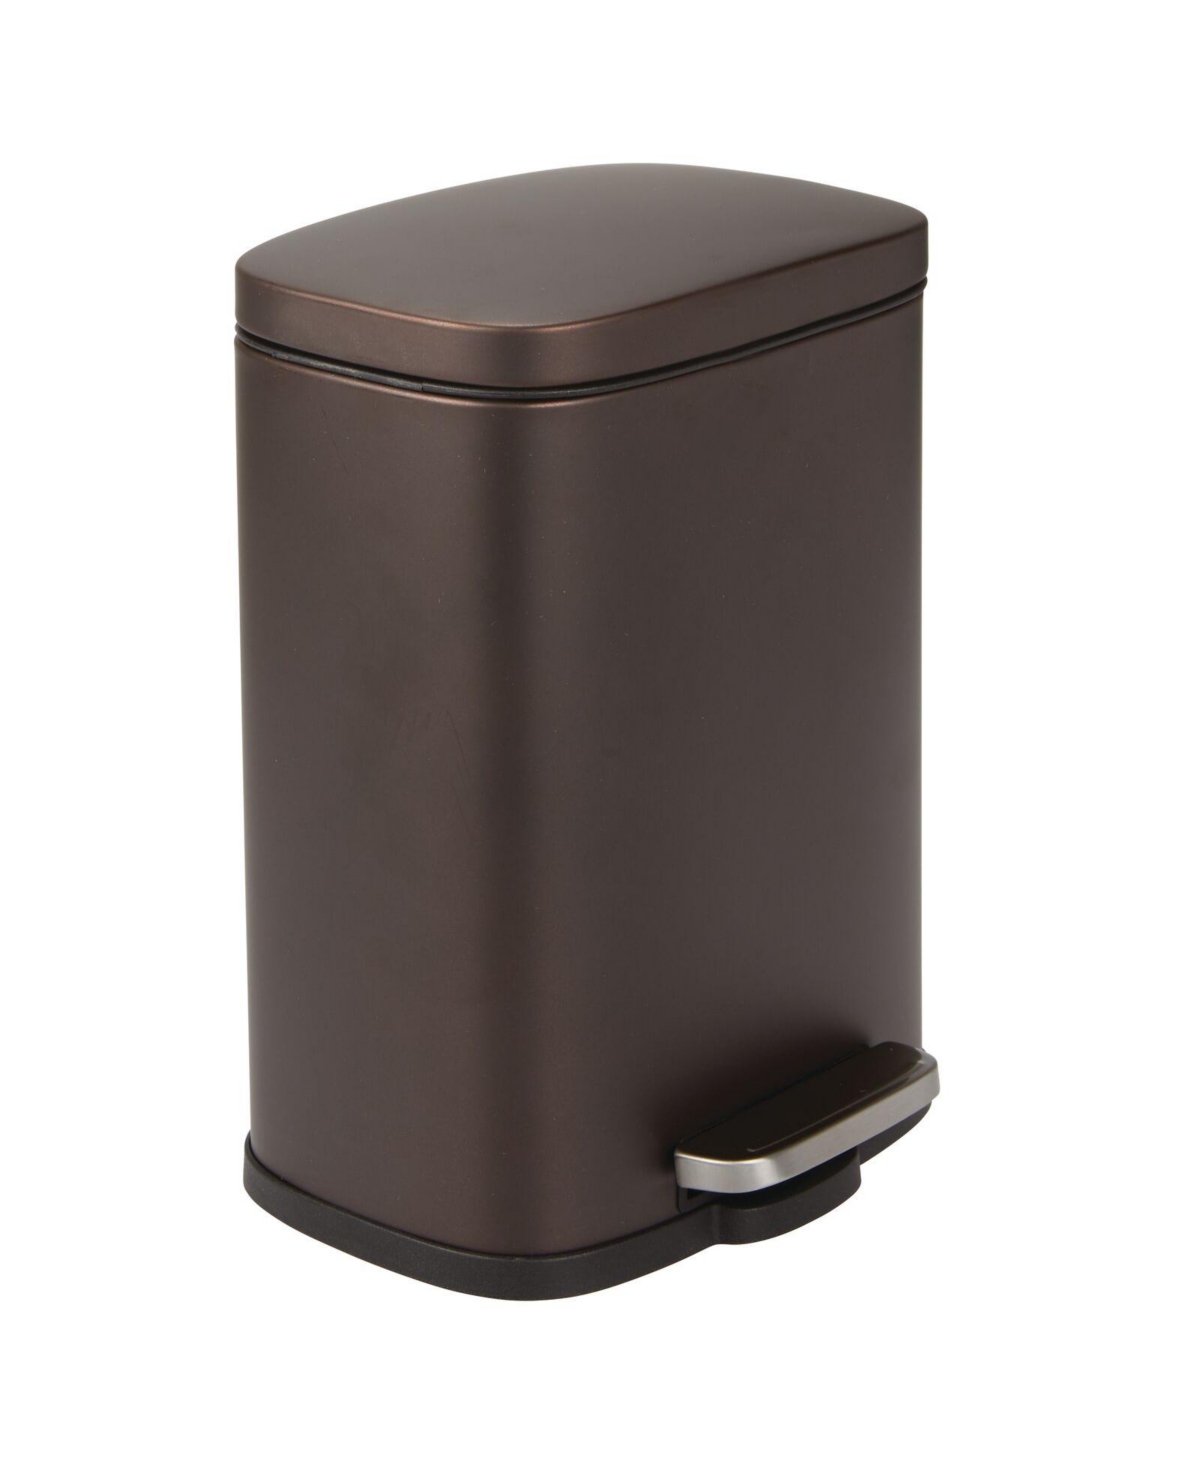 Stainless Steel Rectangular 1.3 Gallon Foot Step Trash Can with Lid - Bronze